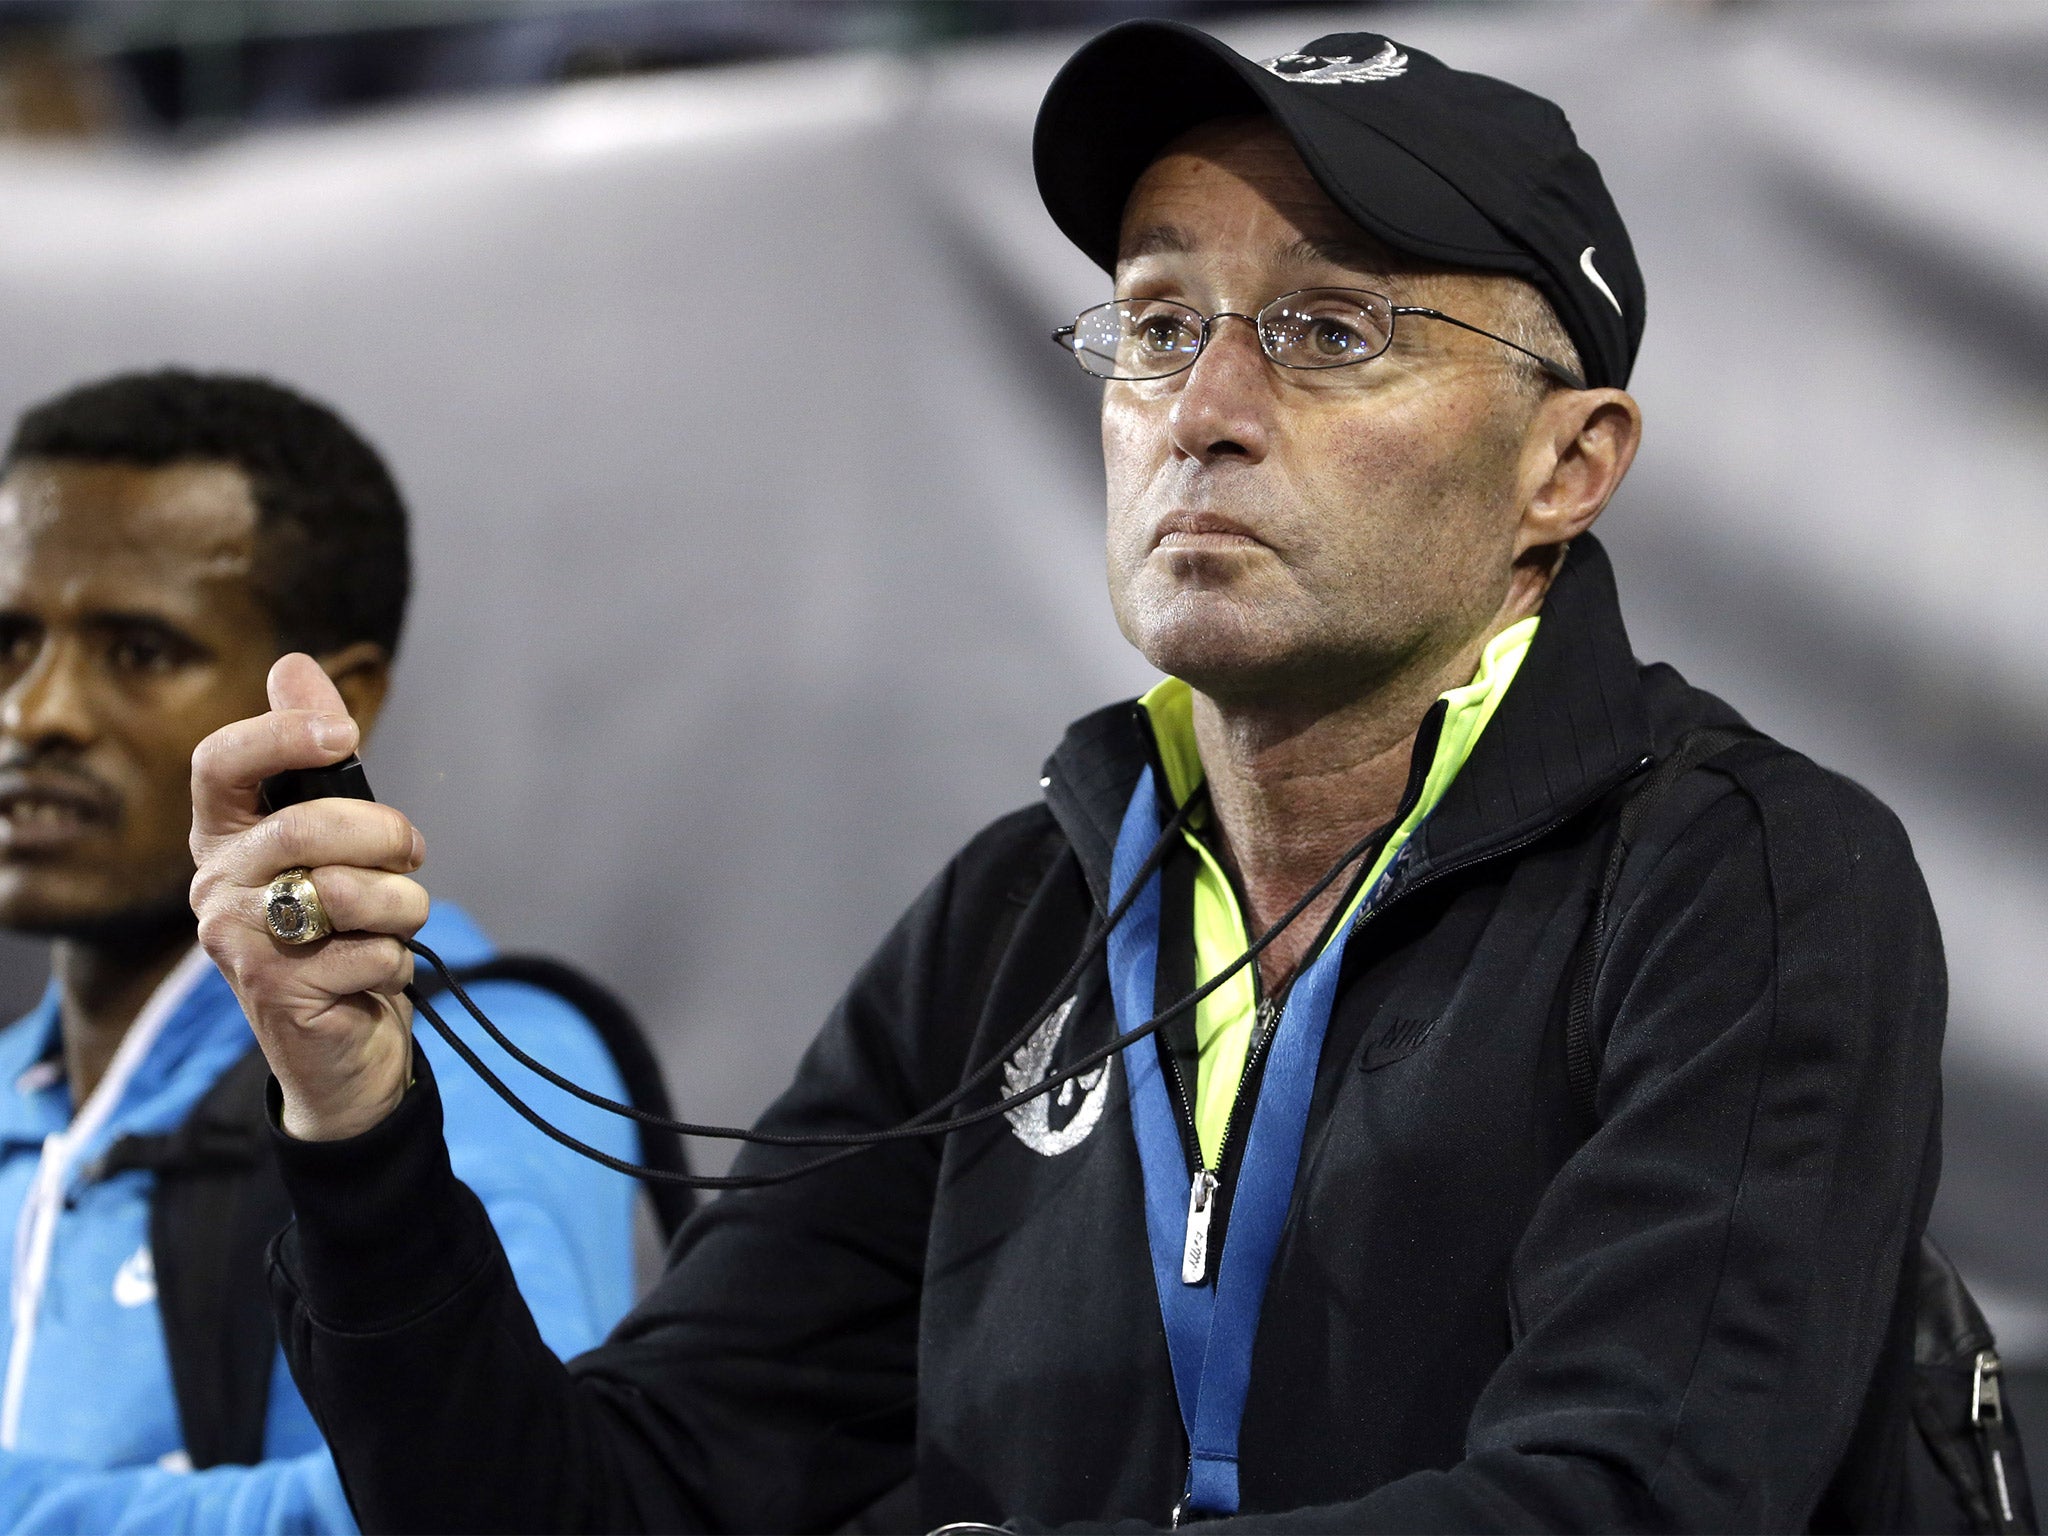 Alberto Salazar has produced a lengthy rebuttal to allegations of doping his athletes